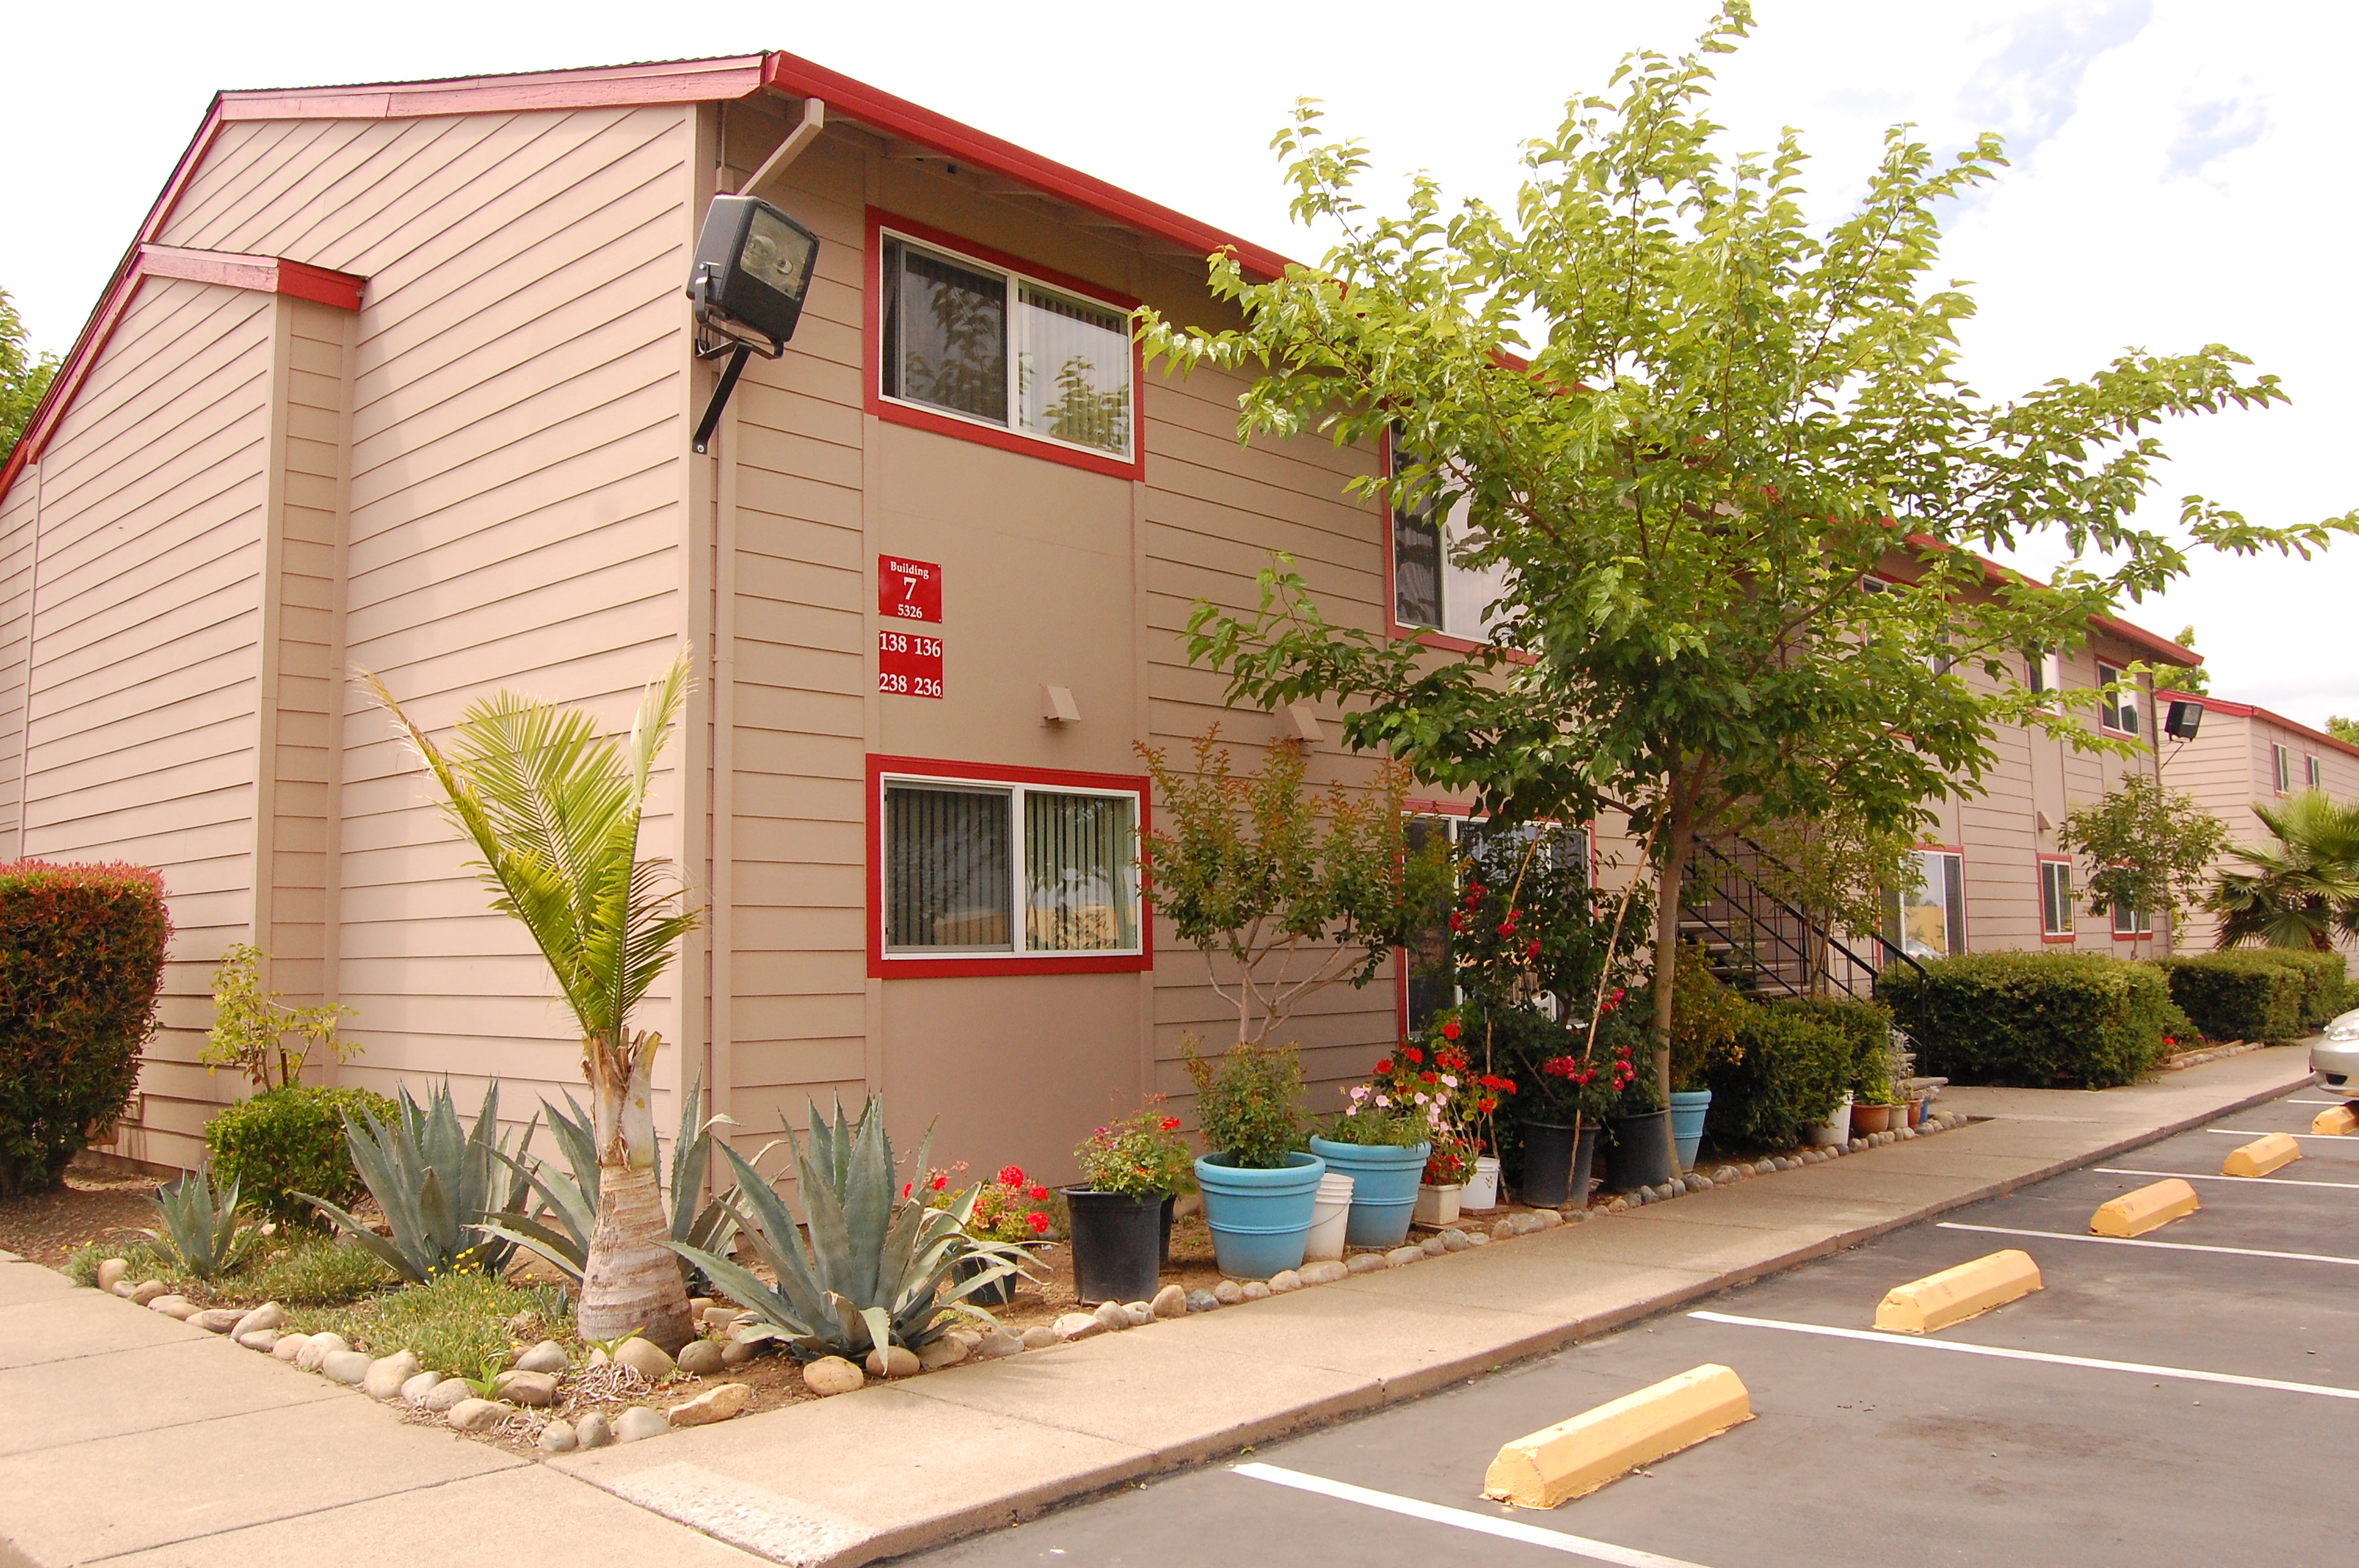 MUTUAL HOUSING AT FOOTHILL FARMS